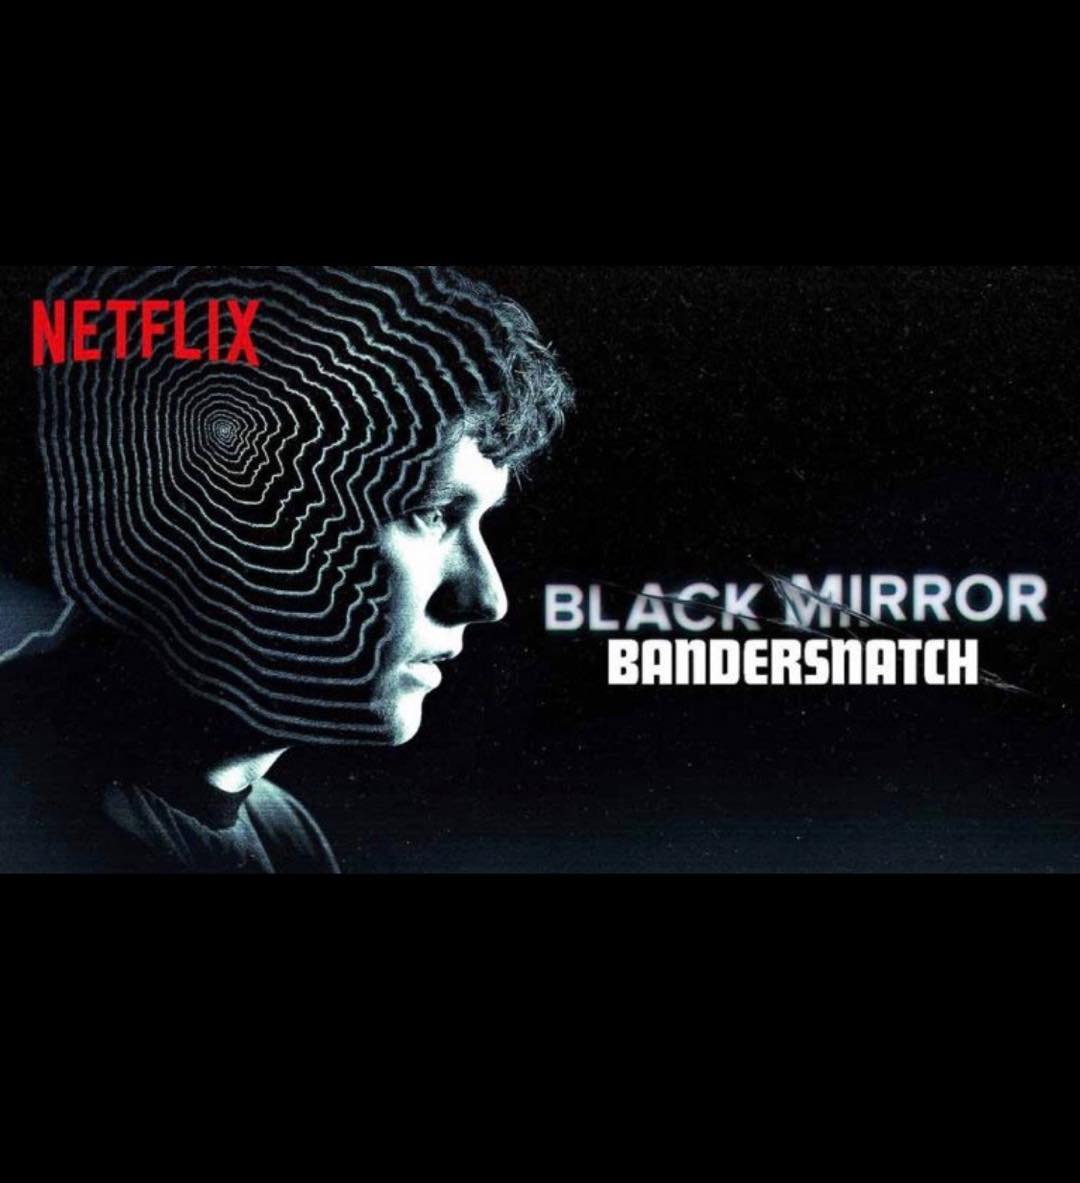 McKenzi watched the new interactive Black Mirror movie and had so much fun/anxiety trying to make the right choices. 👀😳. Have you checked it out? #WowWednesday